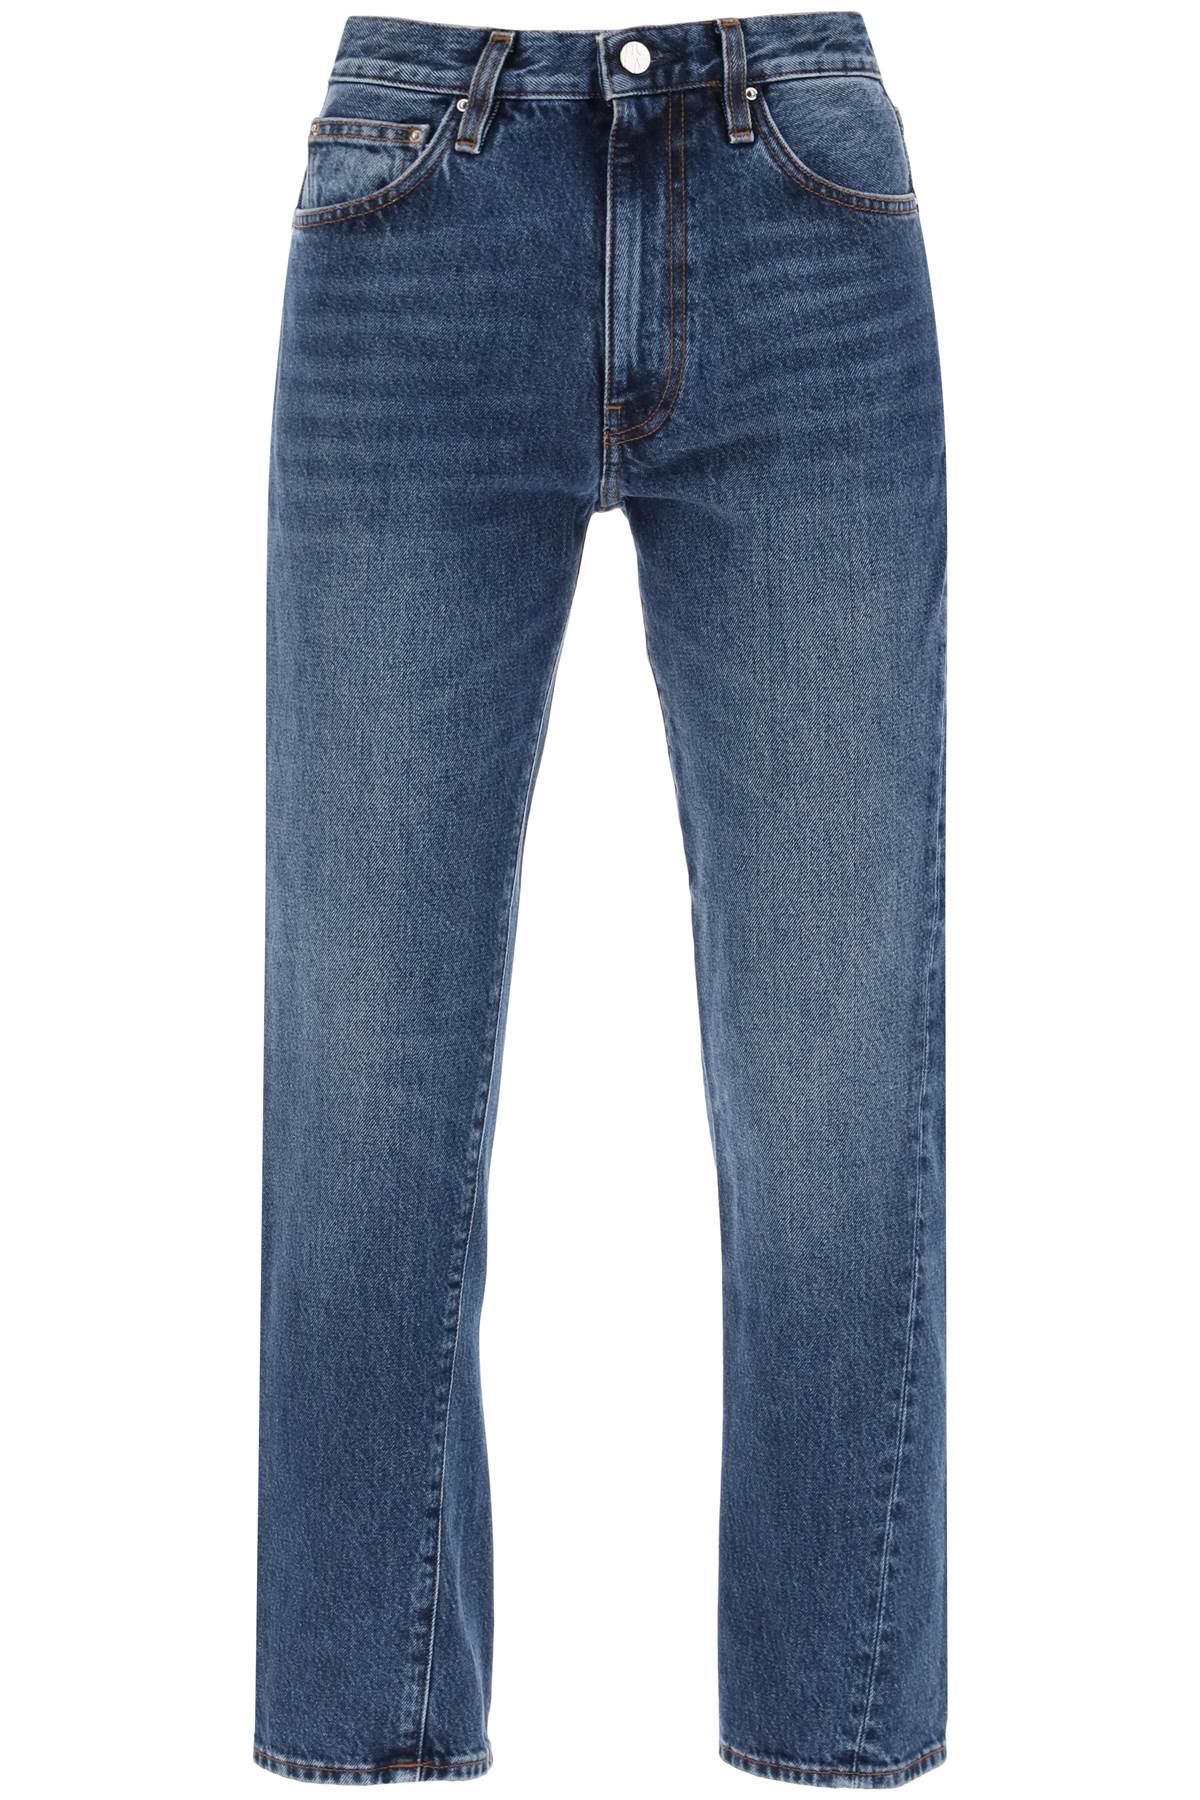 Toteme TOTEME twisted seam straight jeans